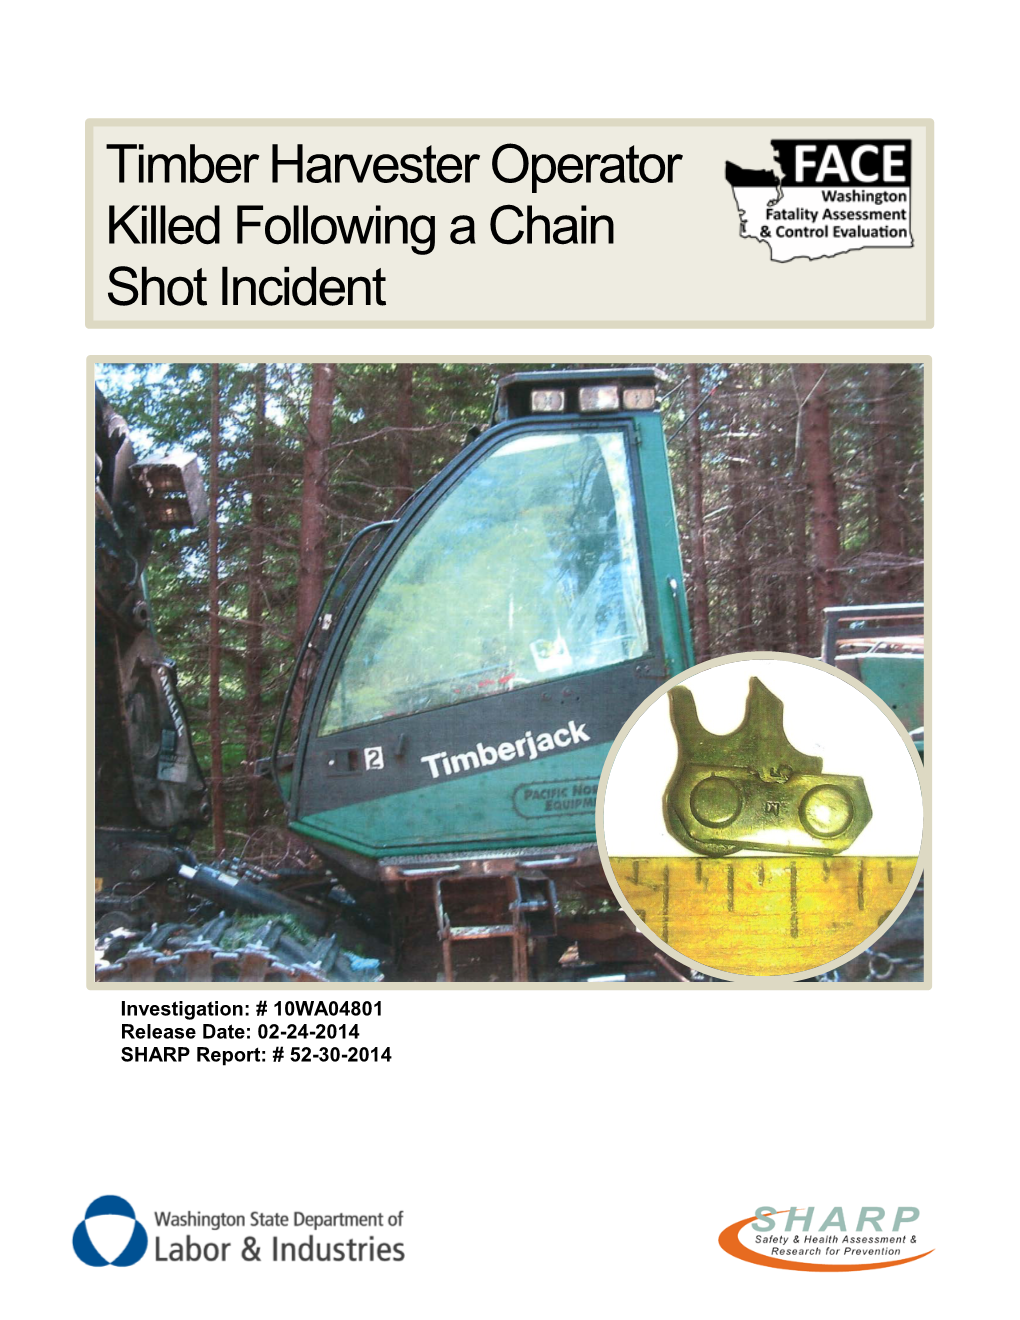 Timber Harvester Operator Killed Following a Chain Shot Incident